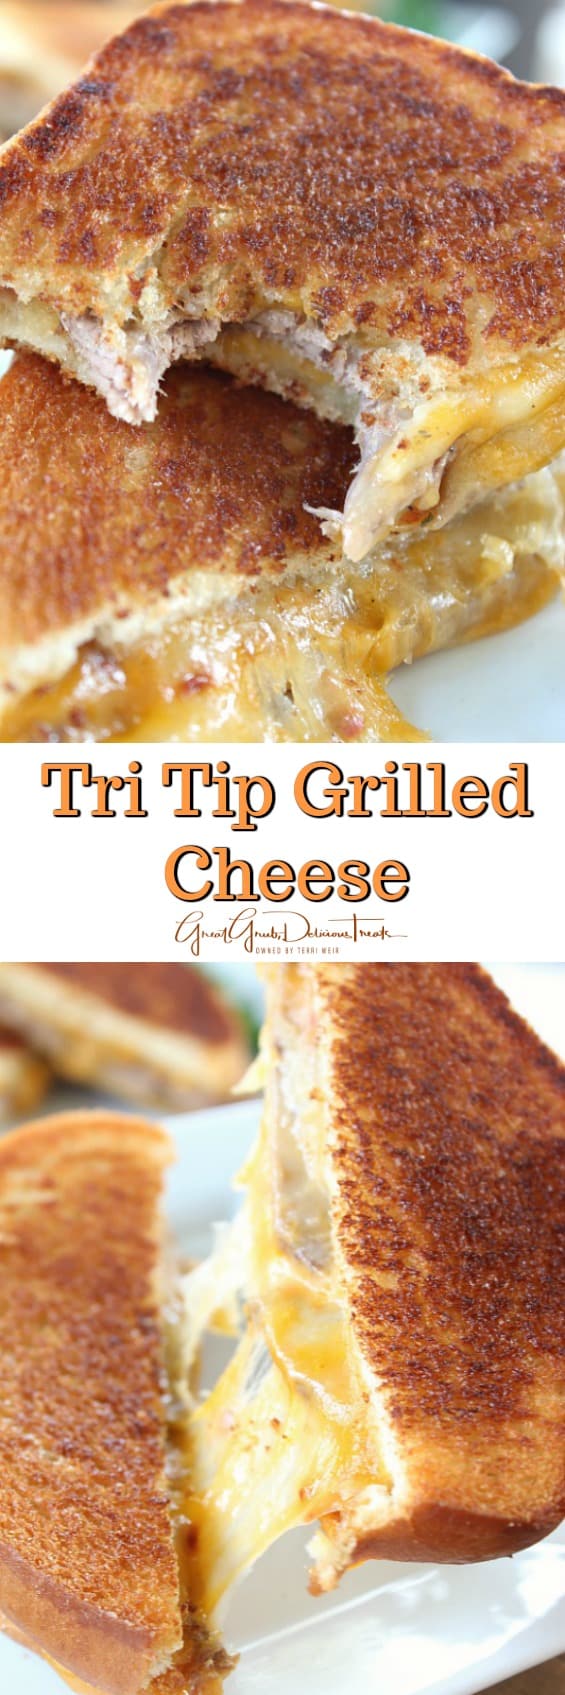 Tri Tip Grilled Cheese